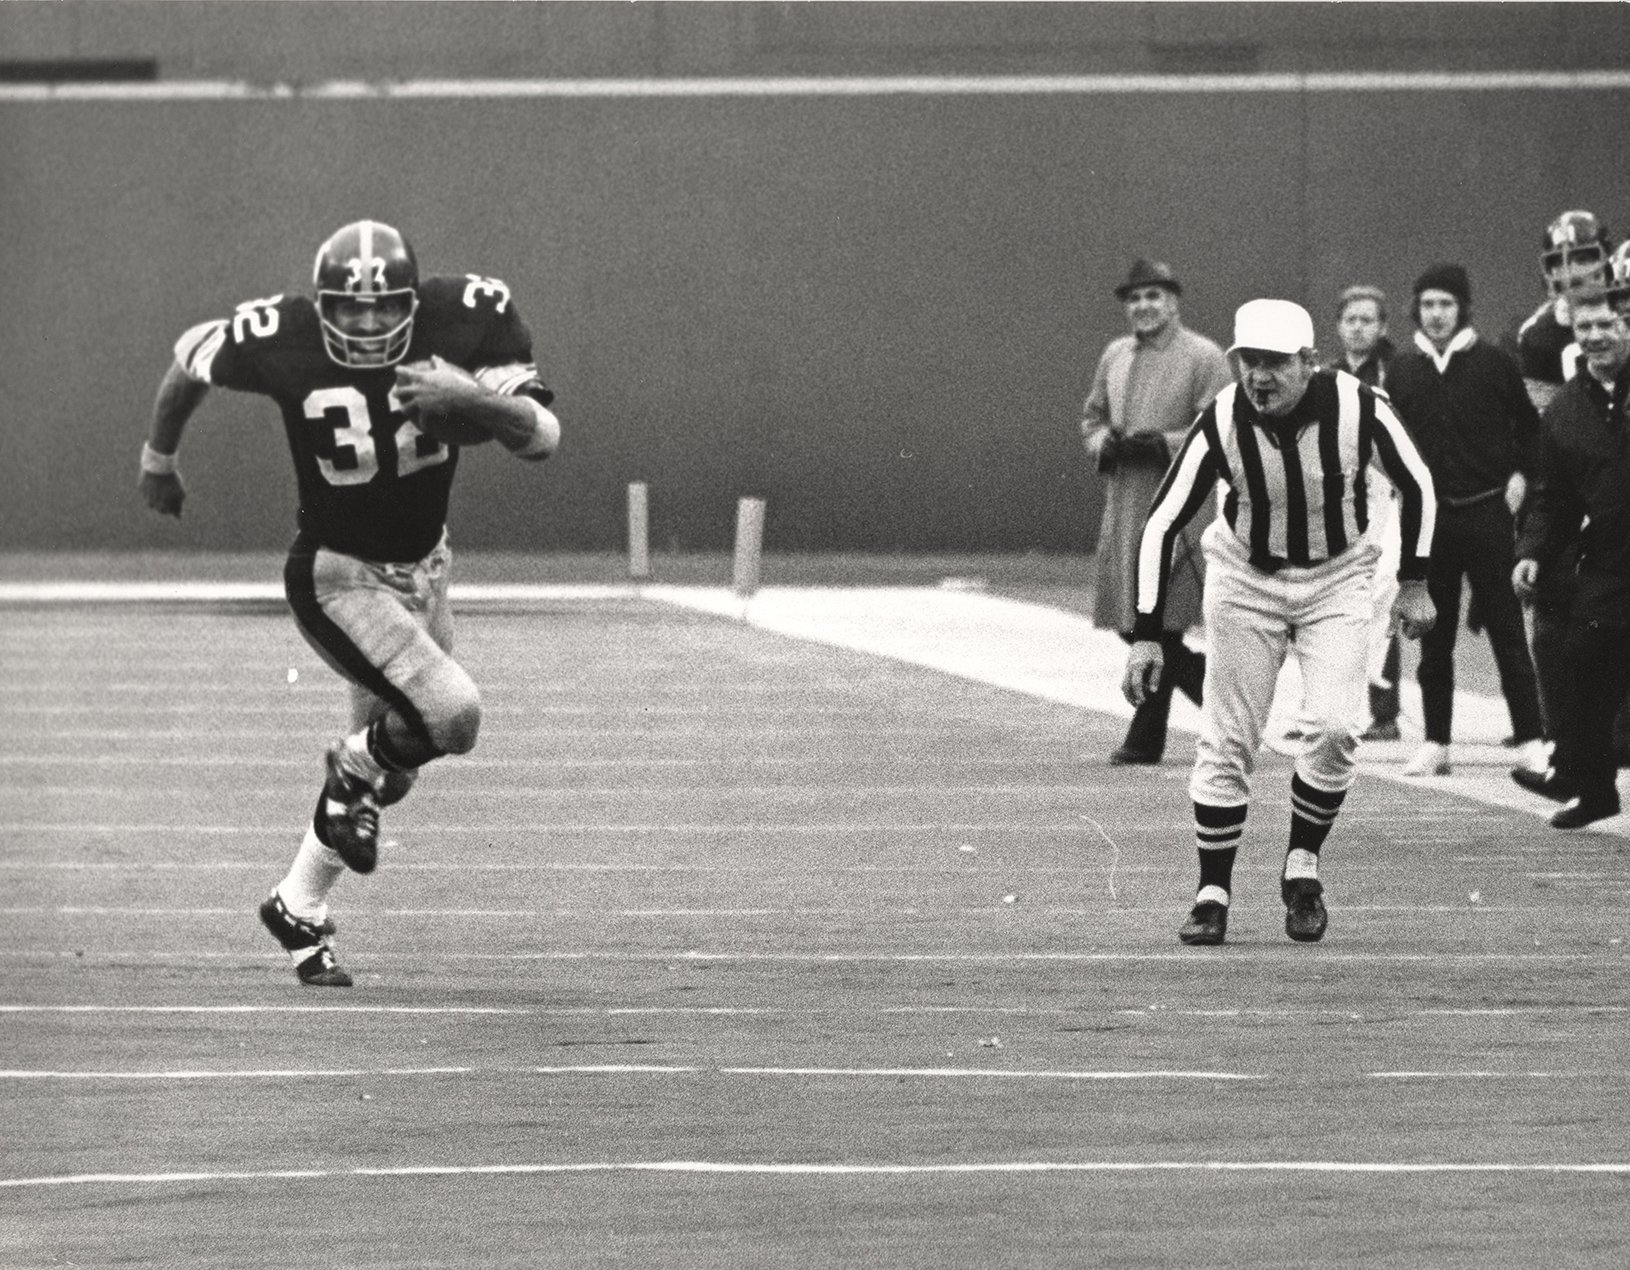 The Immaculate Reception: Catch of a Lifetime | Pro Football Hall of Fame